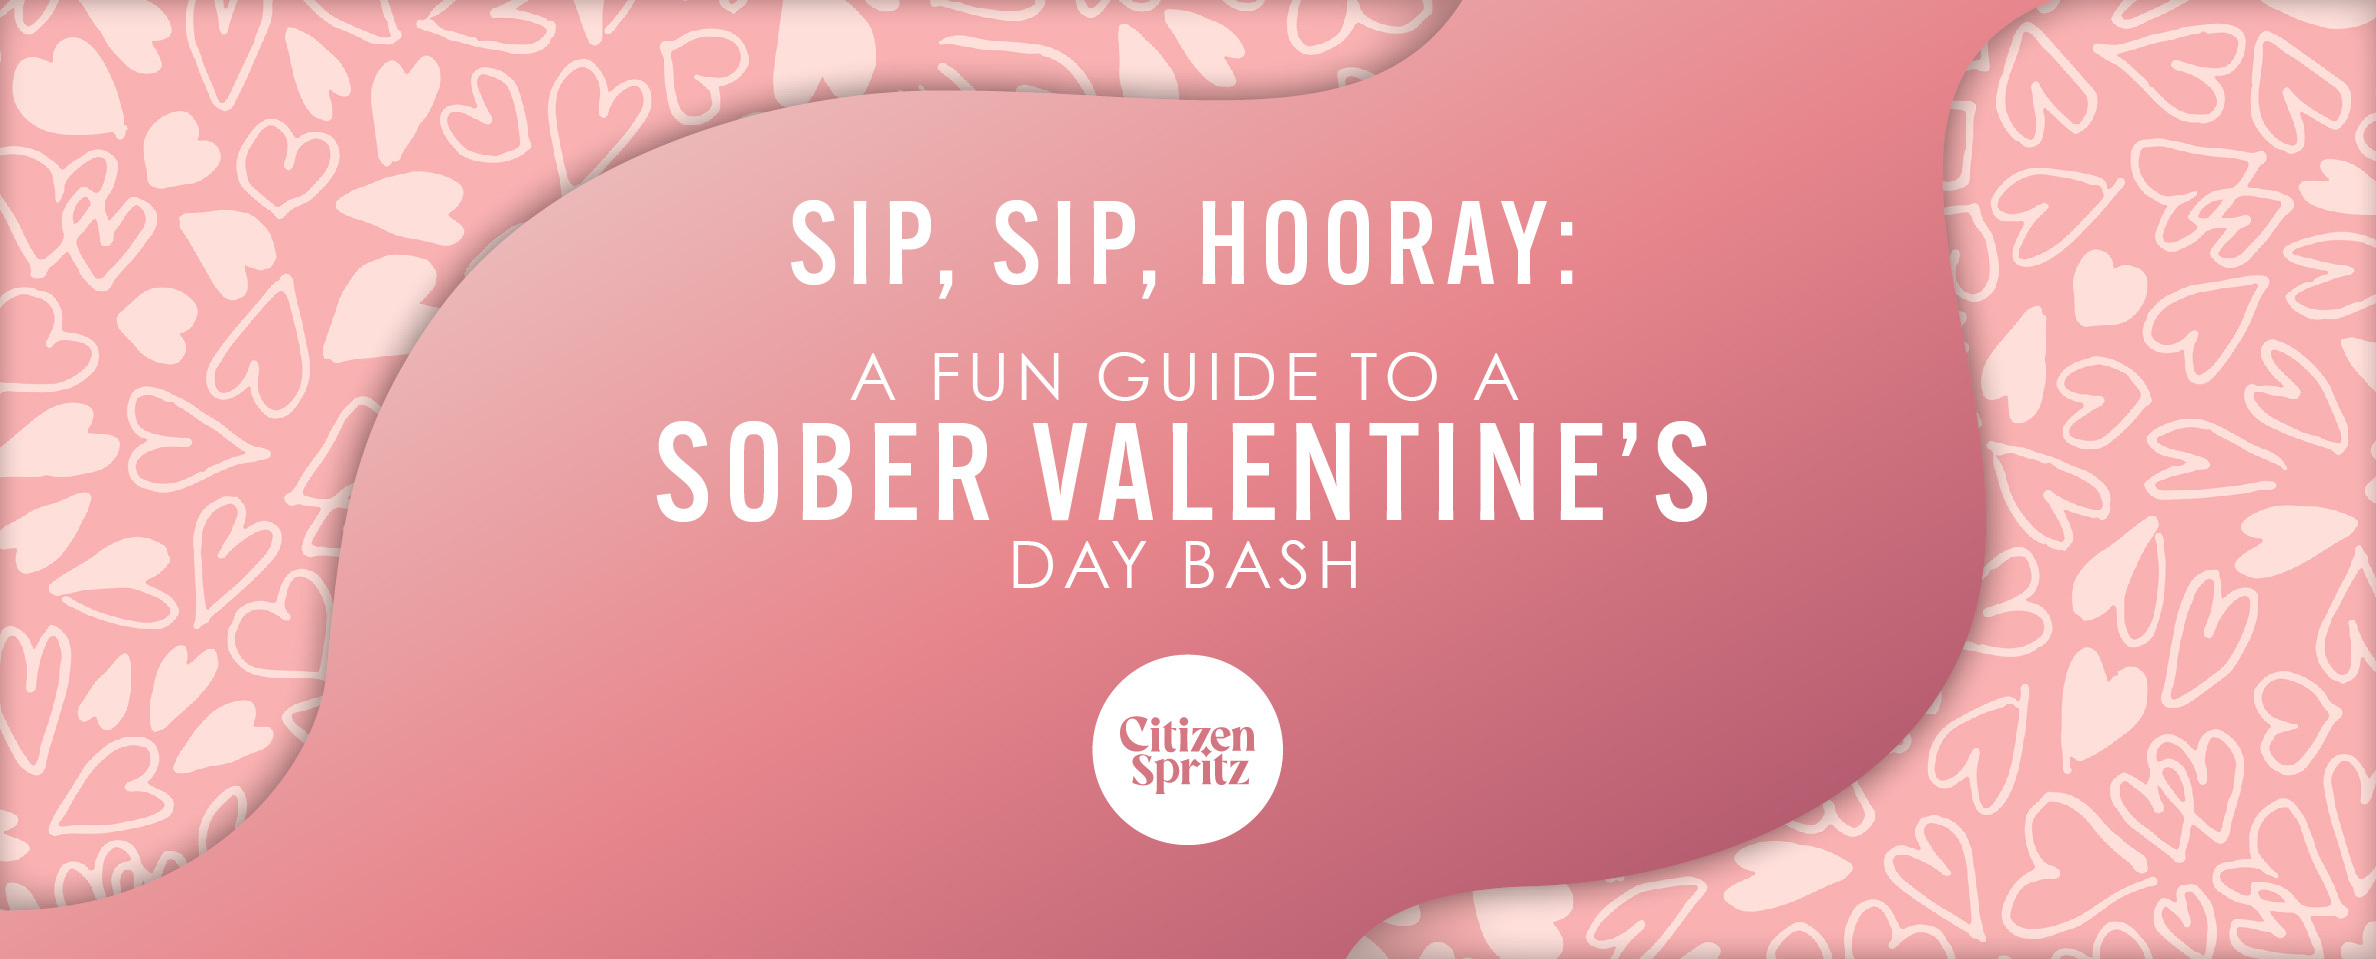 Cheers to a Fun Sober Valentine's Day with Non-Alcoholic Spritz Delights!